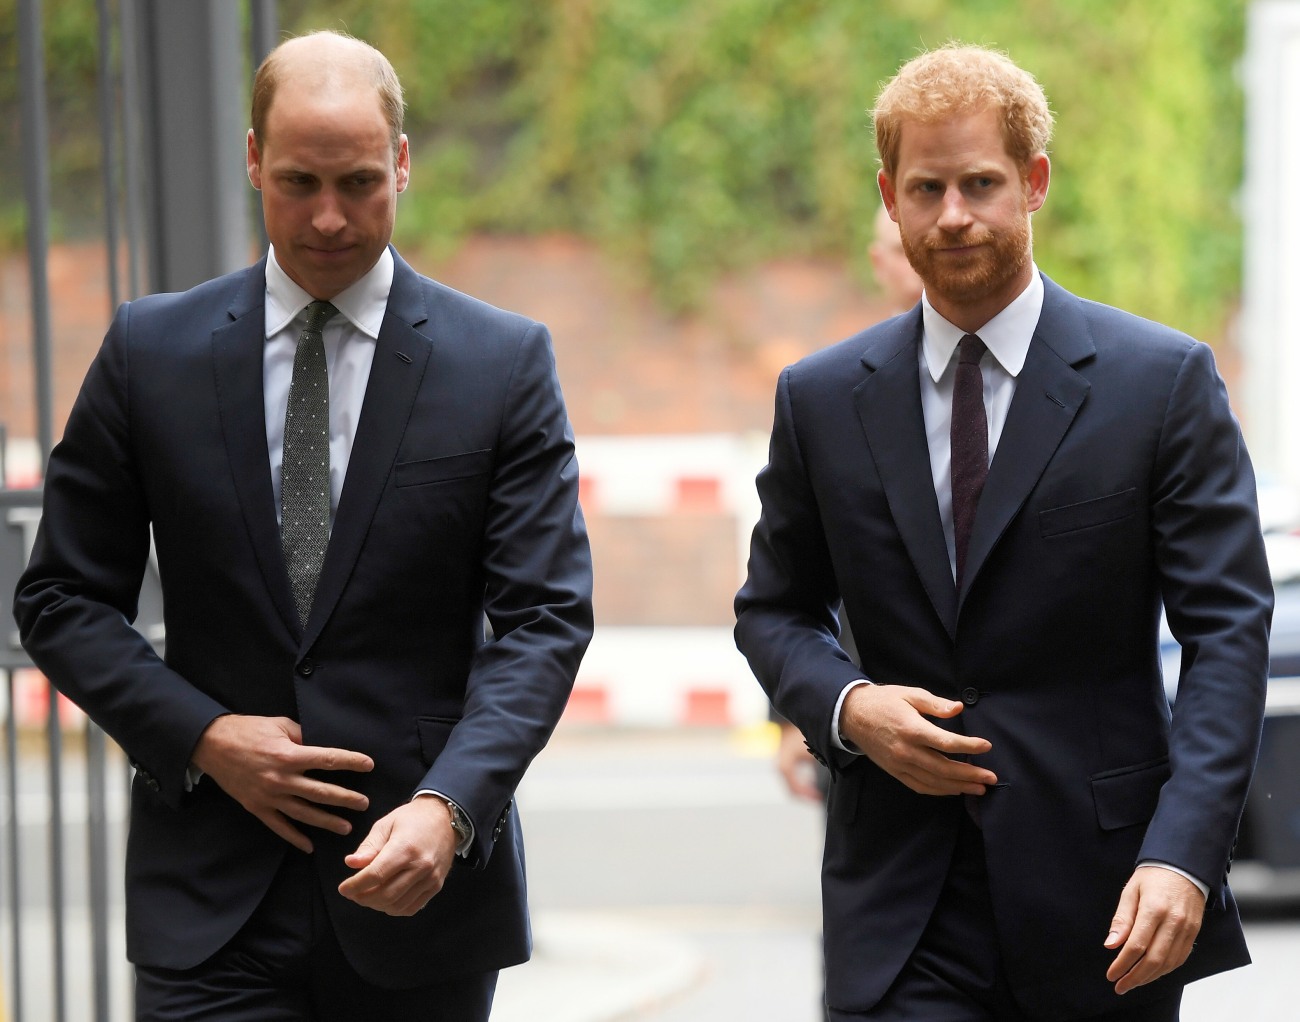 Daily Beast: Can Prince William ‘forgive’ Prince Harry in time for his visit next week?